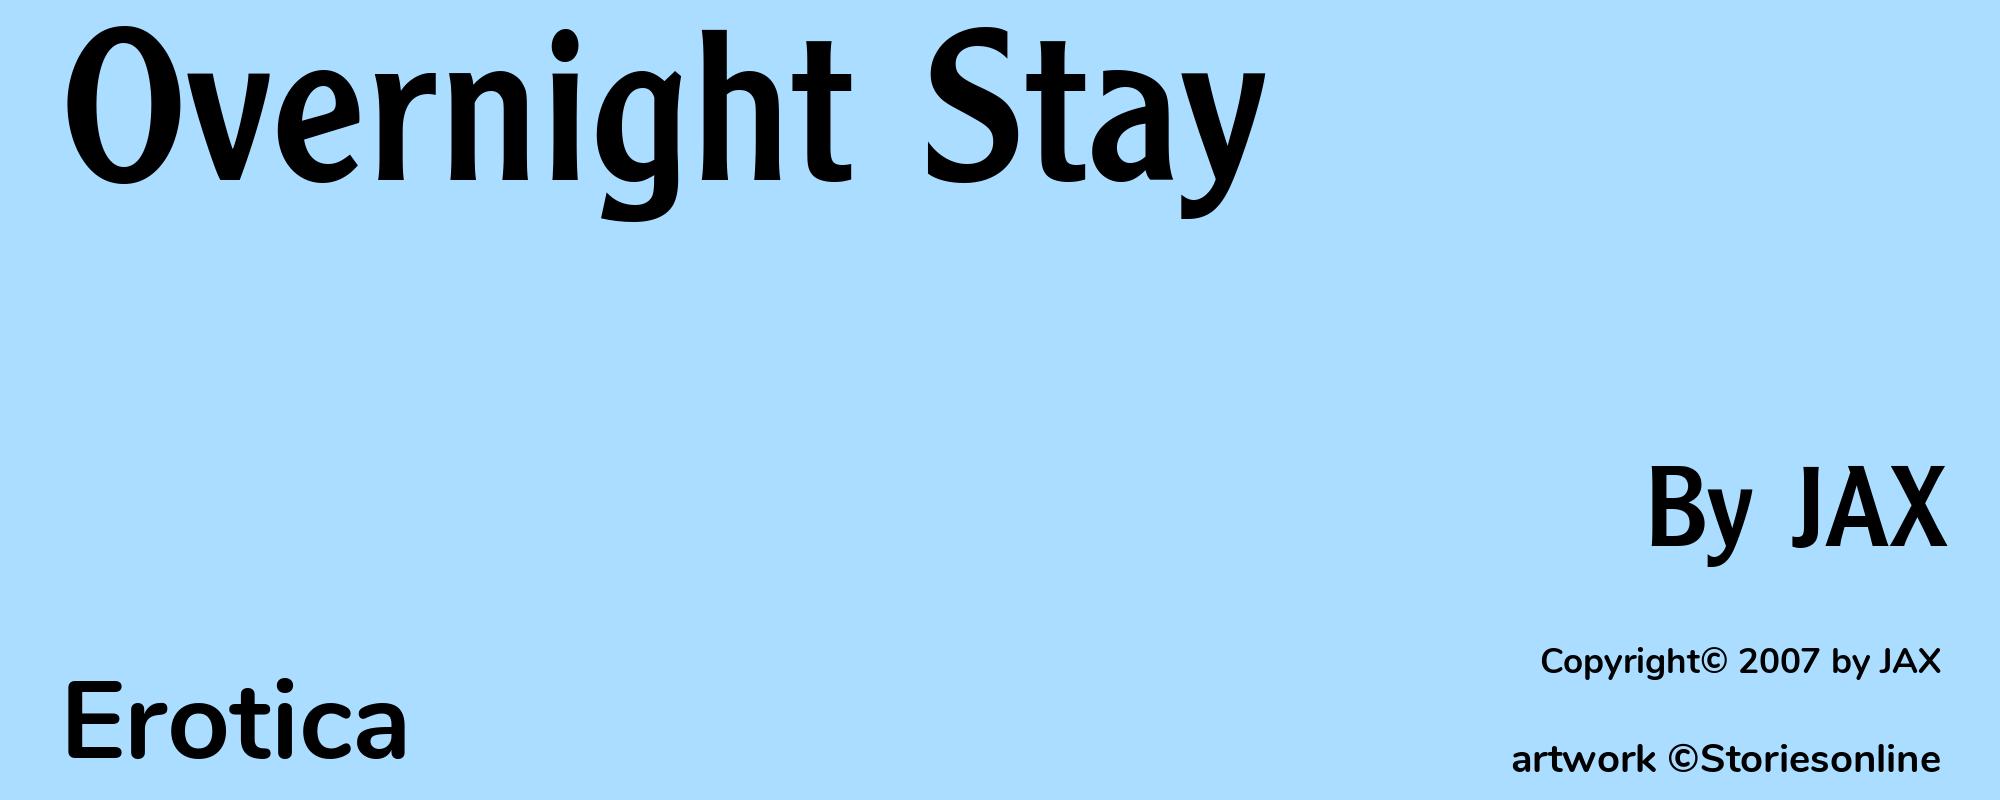 Overnight Stay - Cover